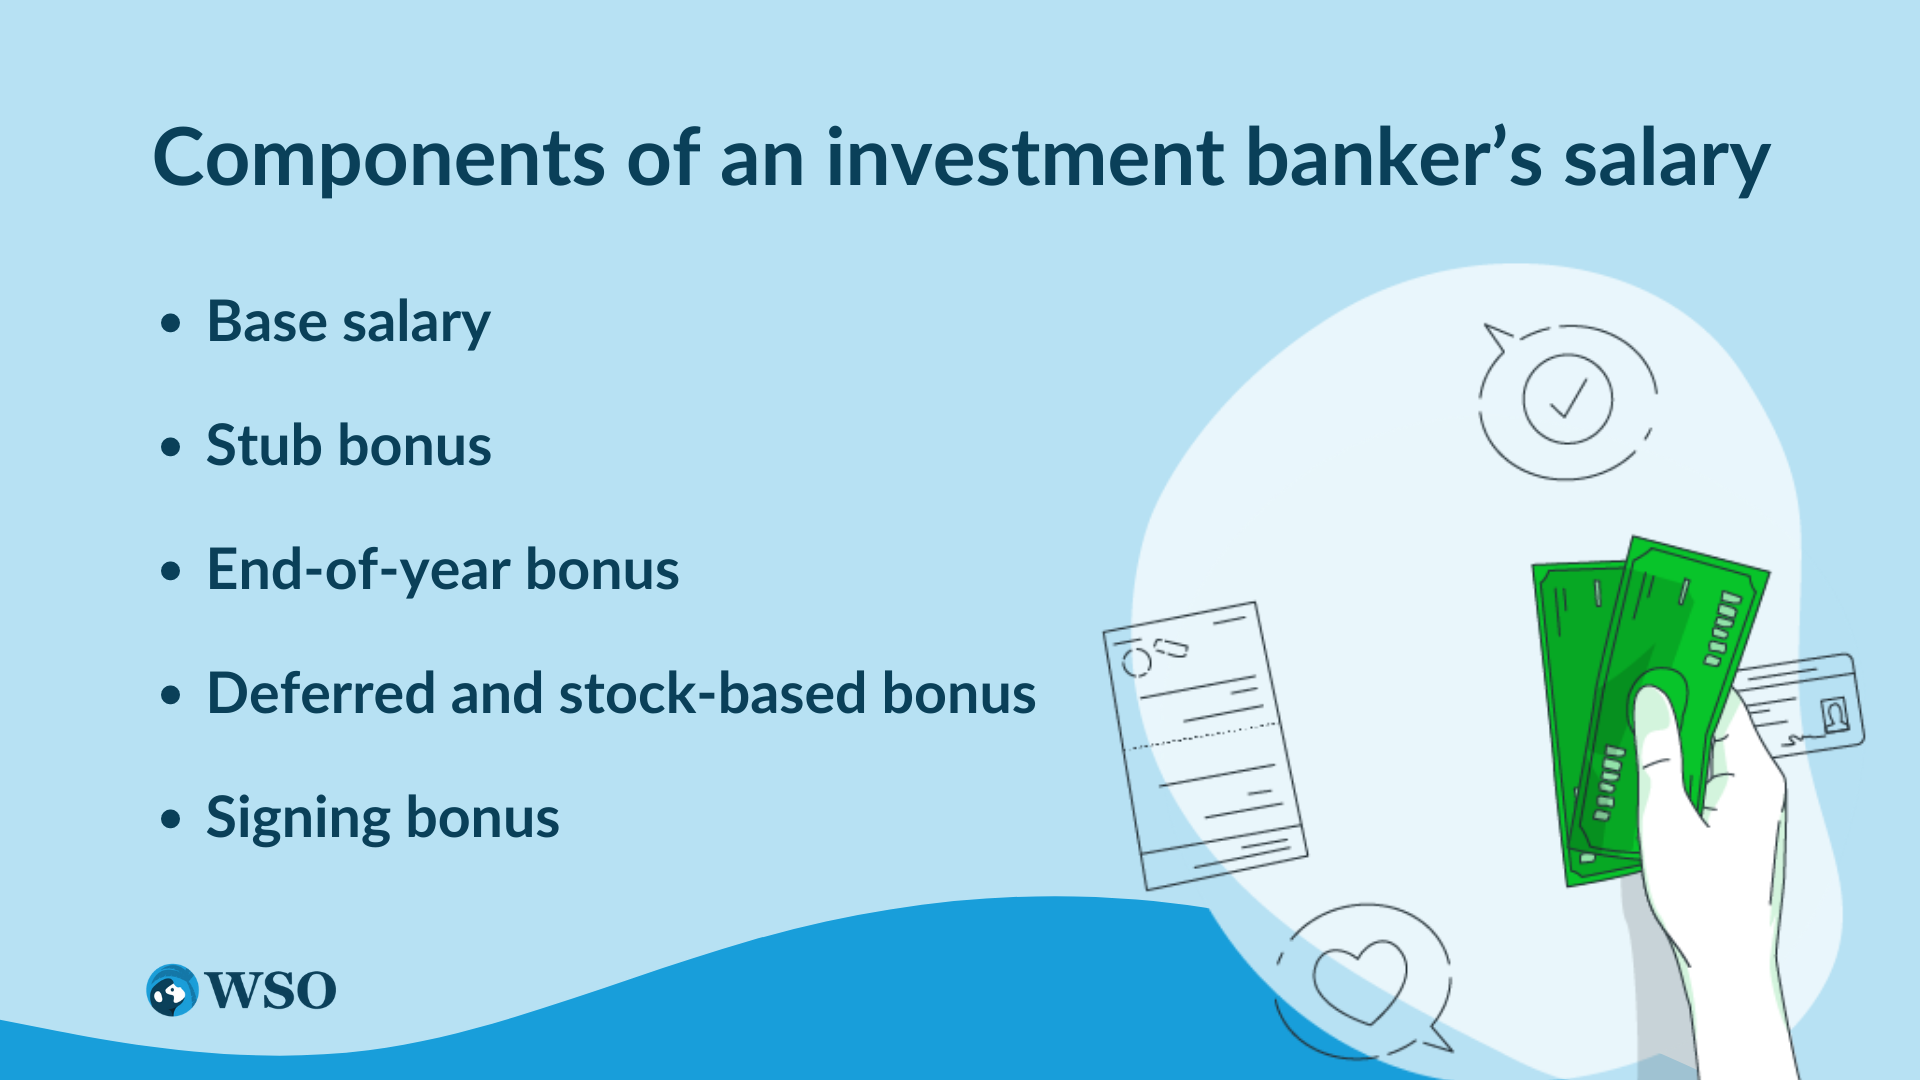 Components Of An Investment Banker's Salary